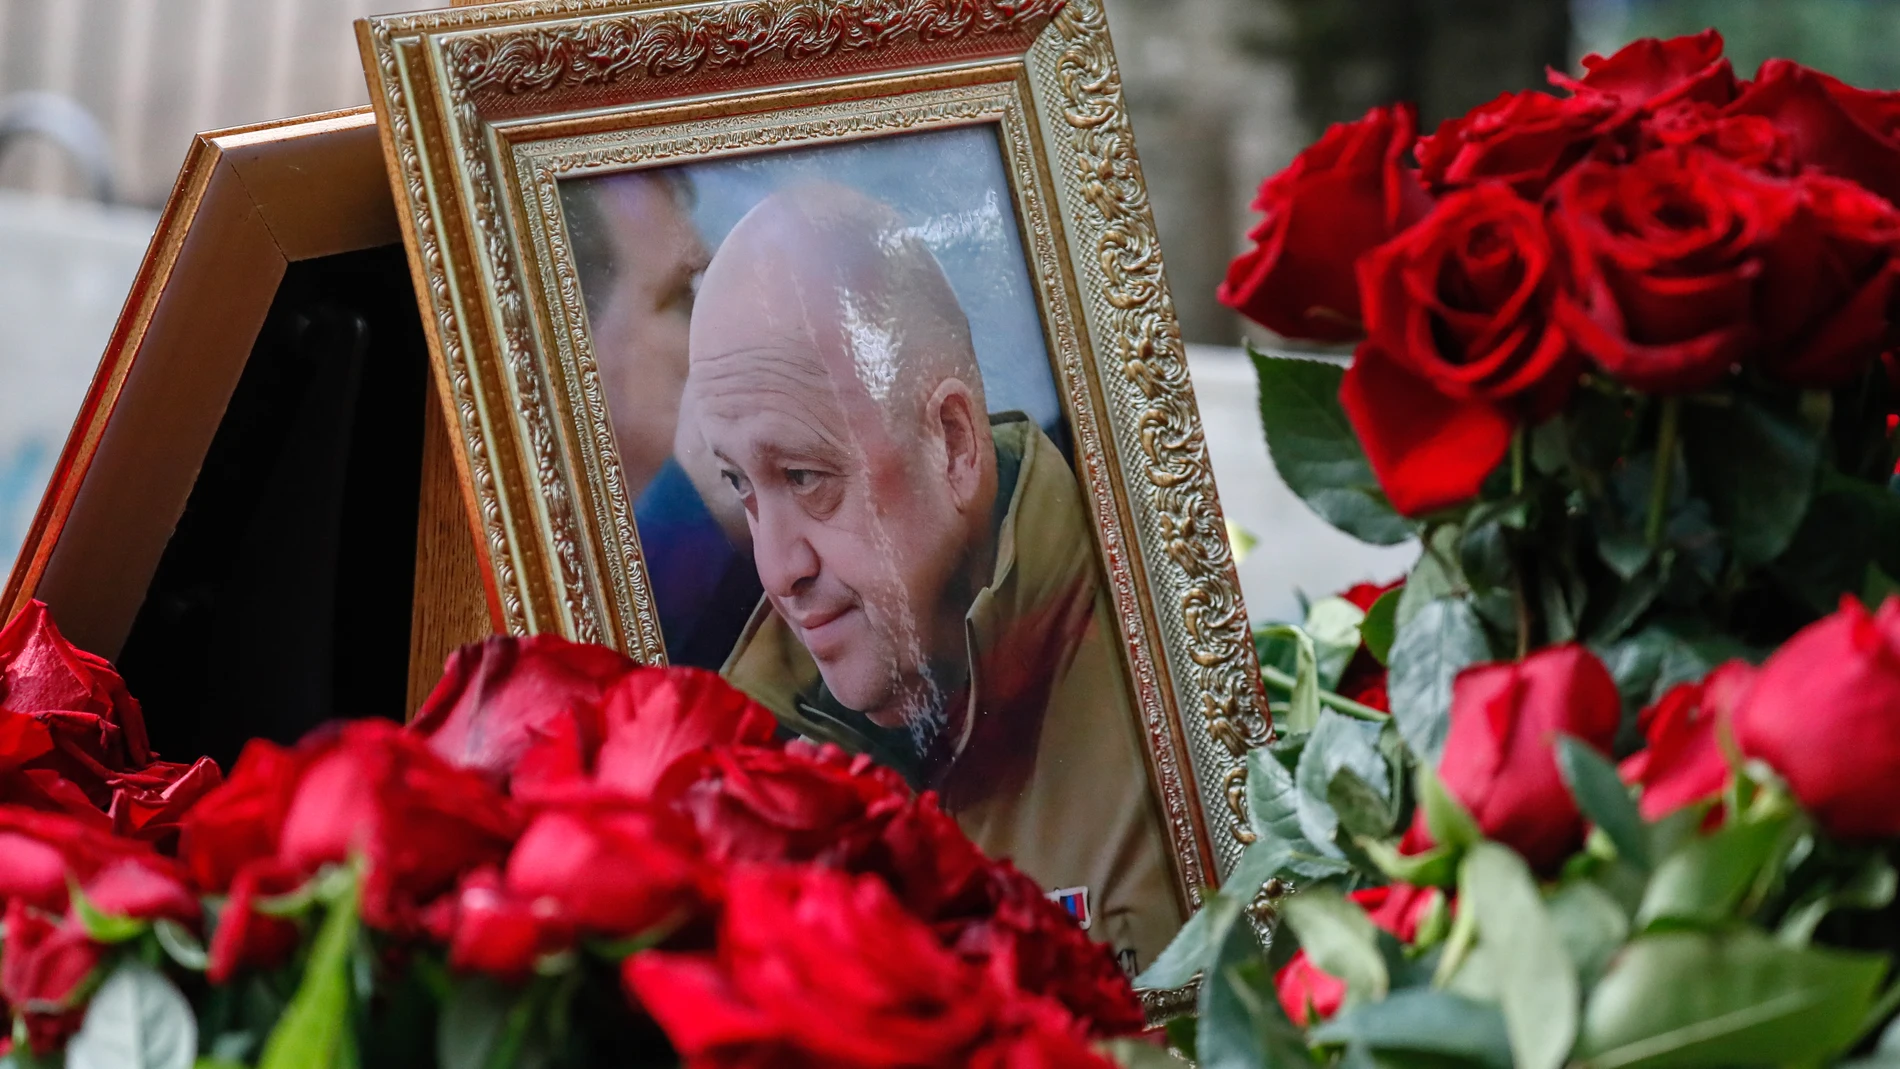 St. Petersburg (Russian Federation), 30/08/2023.- A portrait of PMC Wagner group chief Yevgeny Prigozhin sits on his grave at the Porokhov cemetery in St. Petersburg, Russia, 30 August 2023. Yevgeny Prigozhin was buried on 29 August near his father's grave during a quiet ceremony at the Porokhov cemetery on the outskirts of St. Petersburg, despite heightened security at the Serafimovskoe Cemetery, where his burial was allegedly expected to take place. Russian authorities on 27 August confirme...